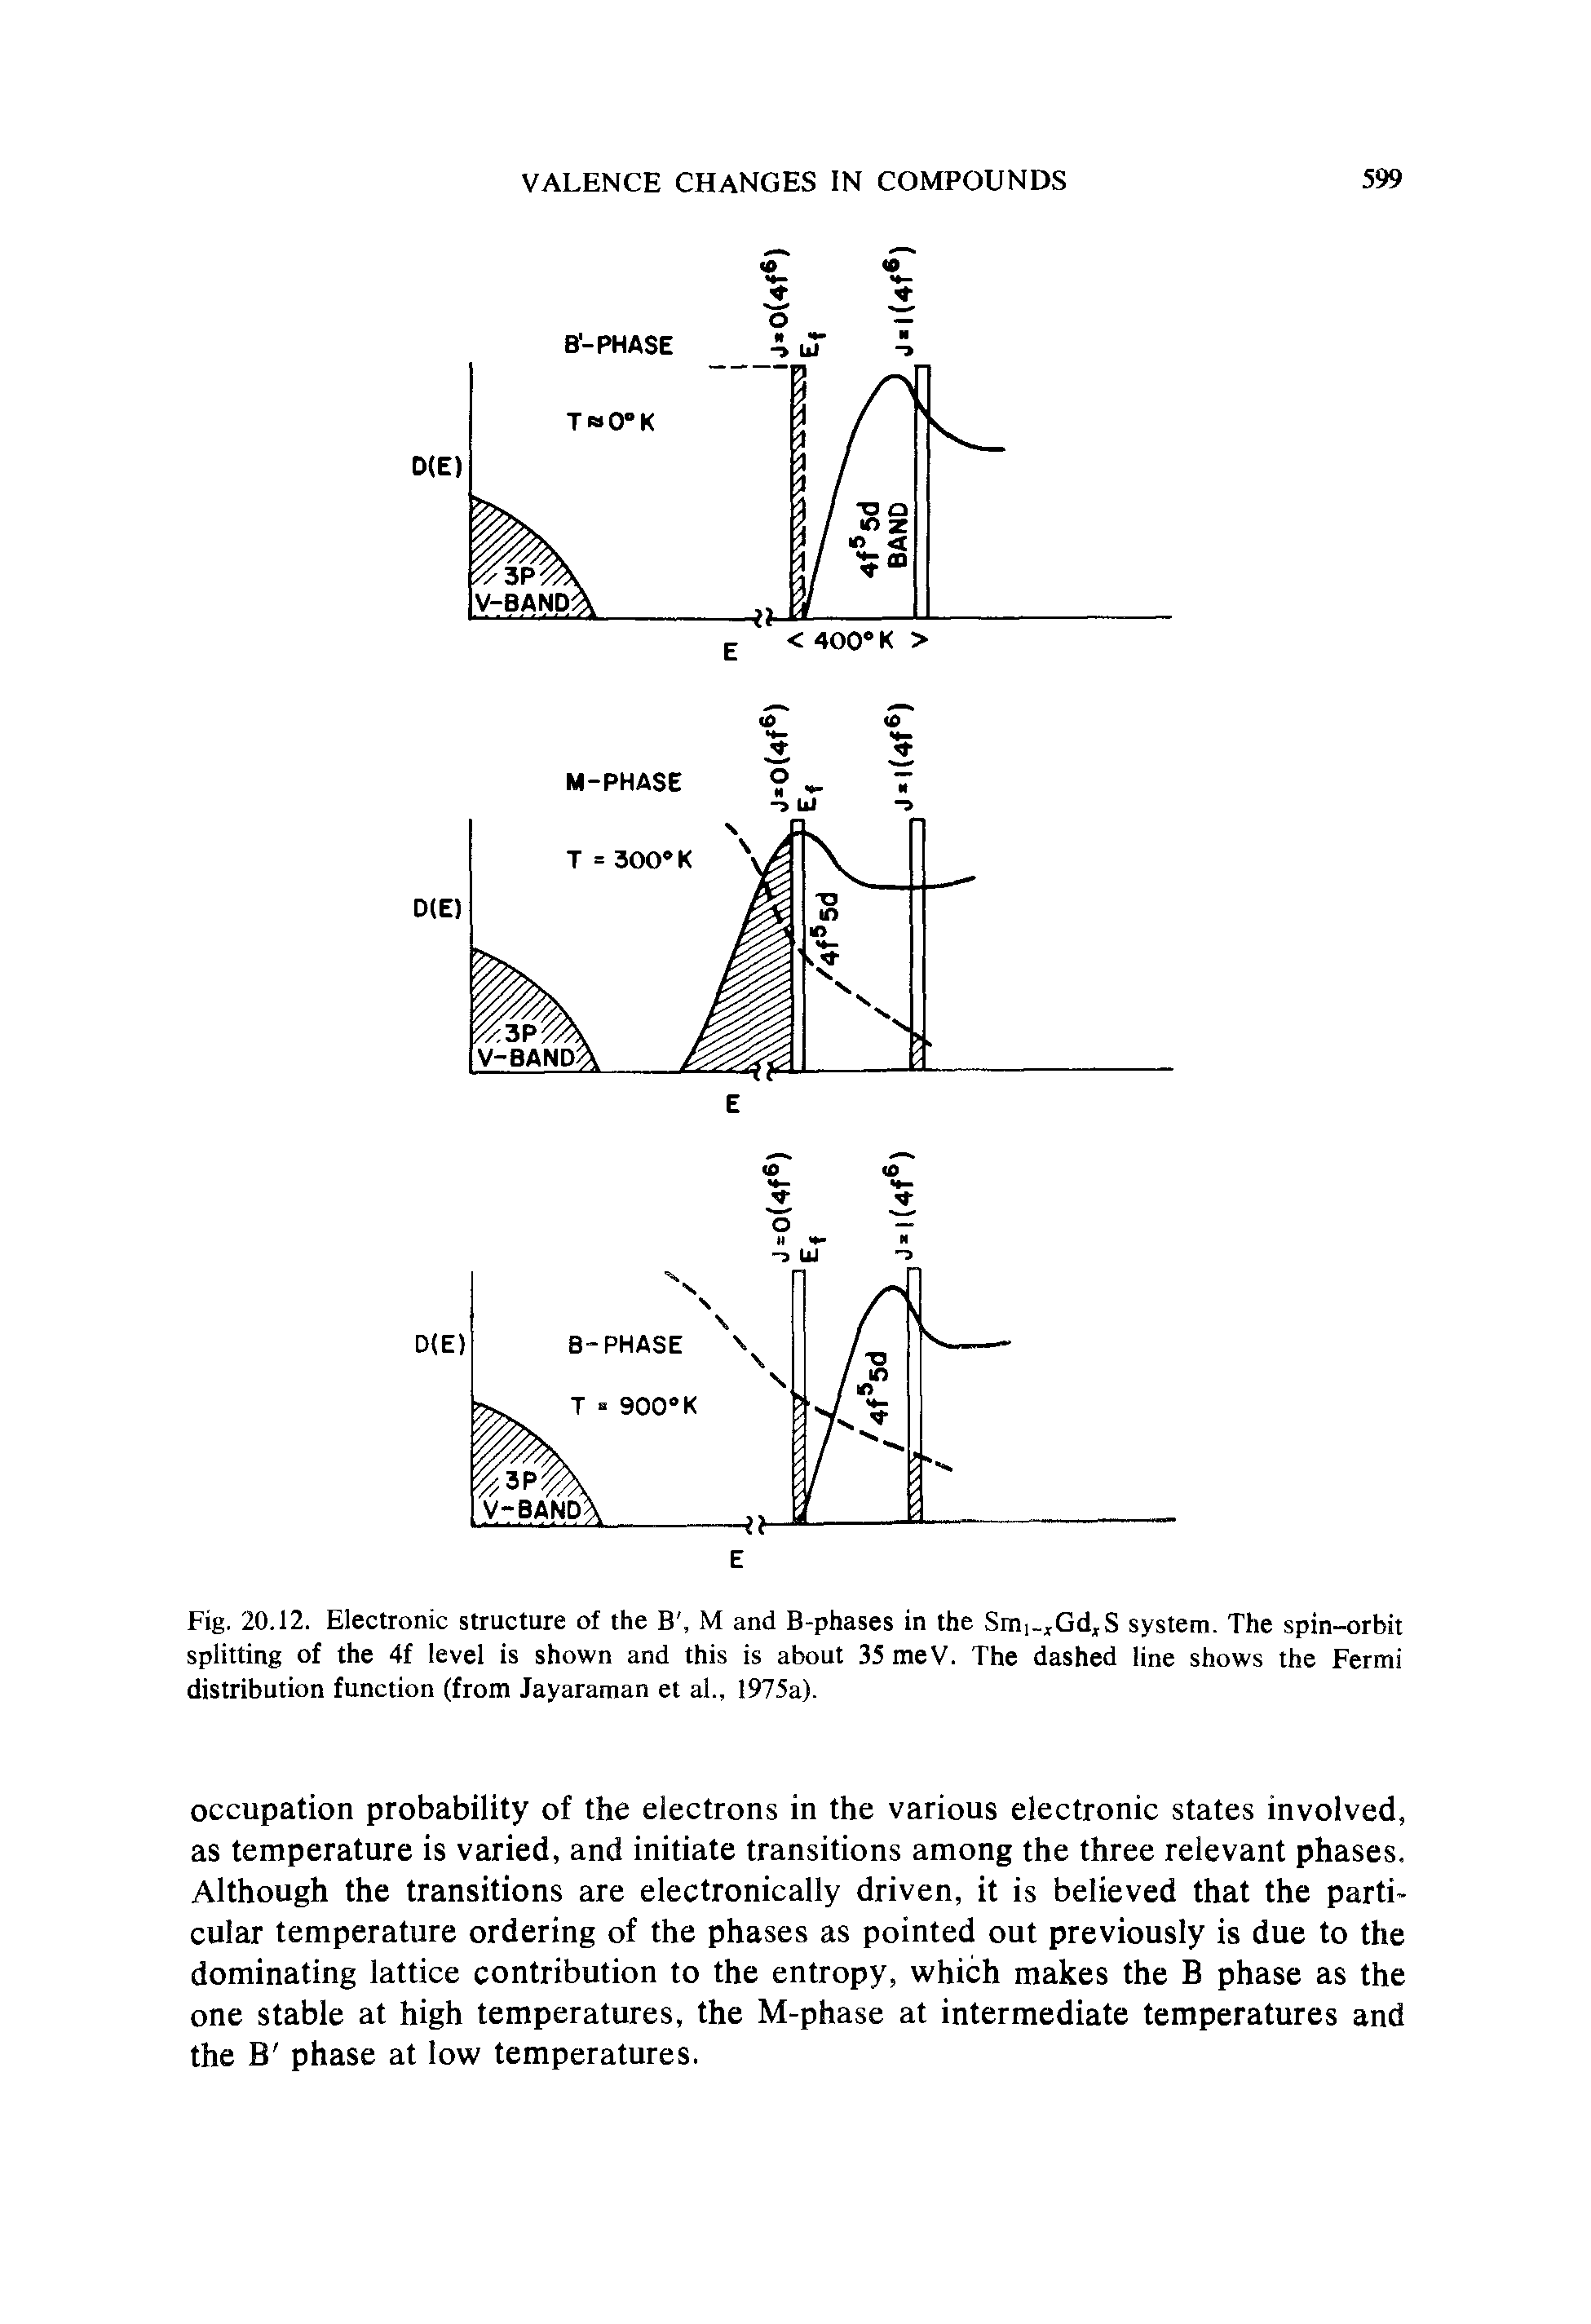 Fig. 20.12. Electronic structure of the B, M and B-phases in the Smi xGd rS system. The spin-orbit splitting of the 4f level is shown and this is about 35meV. The dashed line shows the Fermi distribution function (from Jayaraman et al., 1975a).